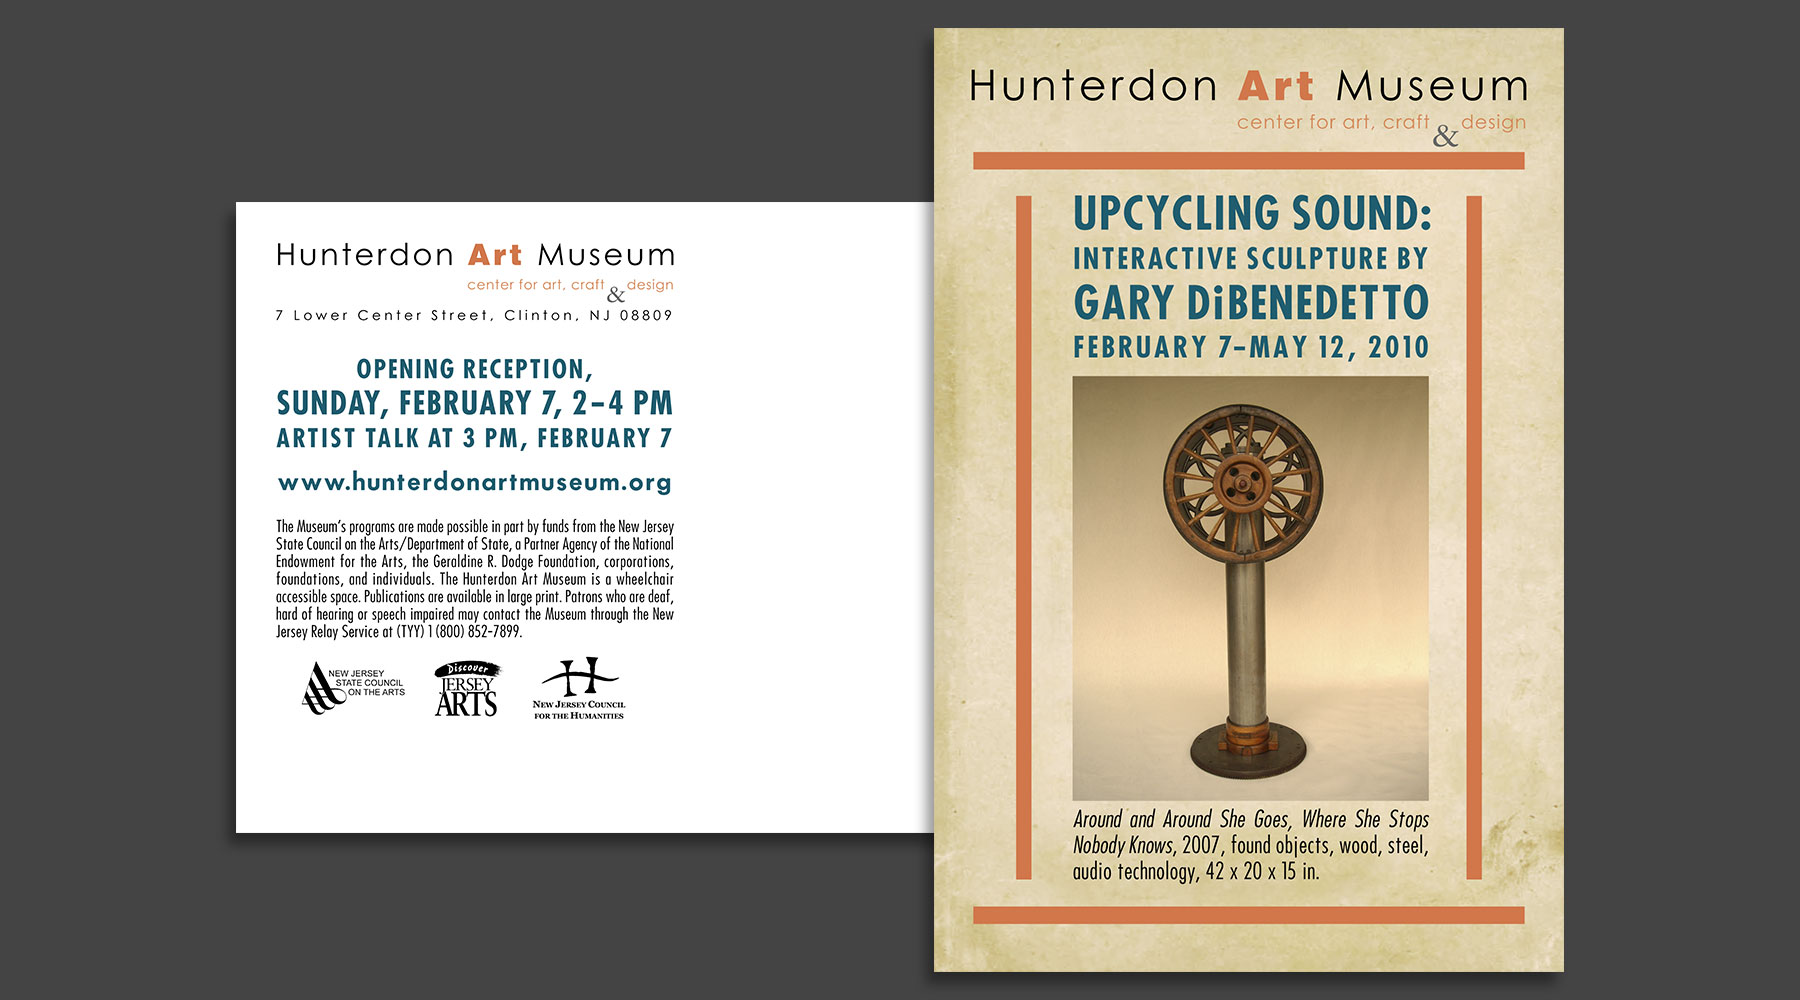 Museum exhibition promotion. Upcycling Sound: Interactive Sculpture by Gary DiBenedetto